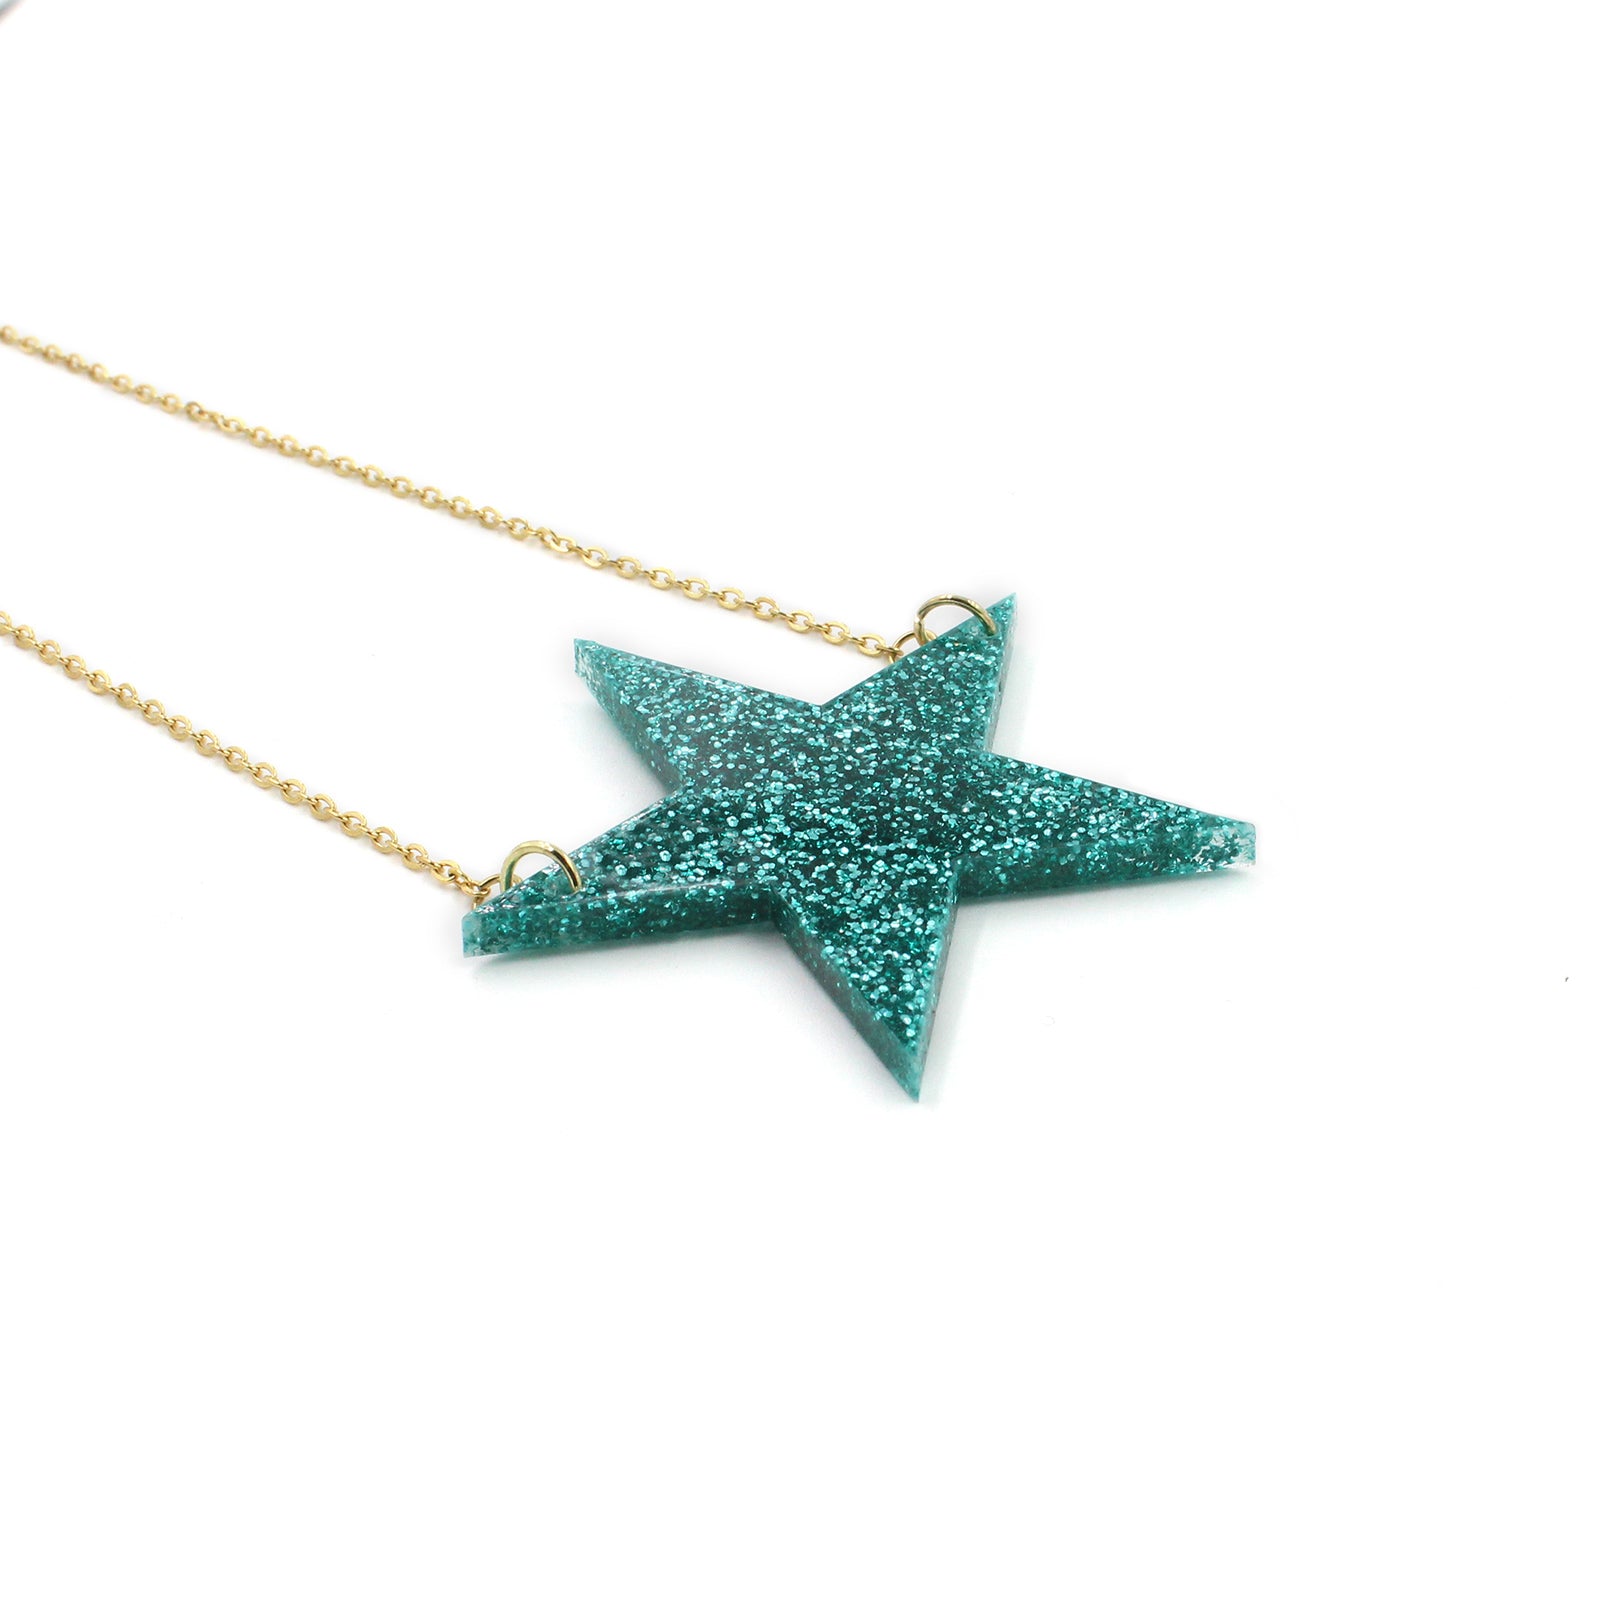 Acrylic Teal Glitter Star Necklace on Gold Chain